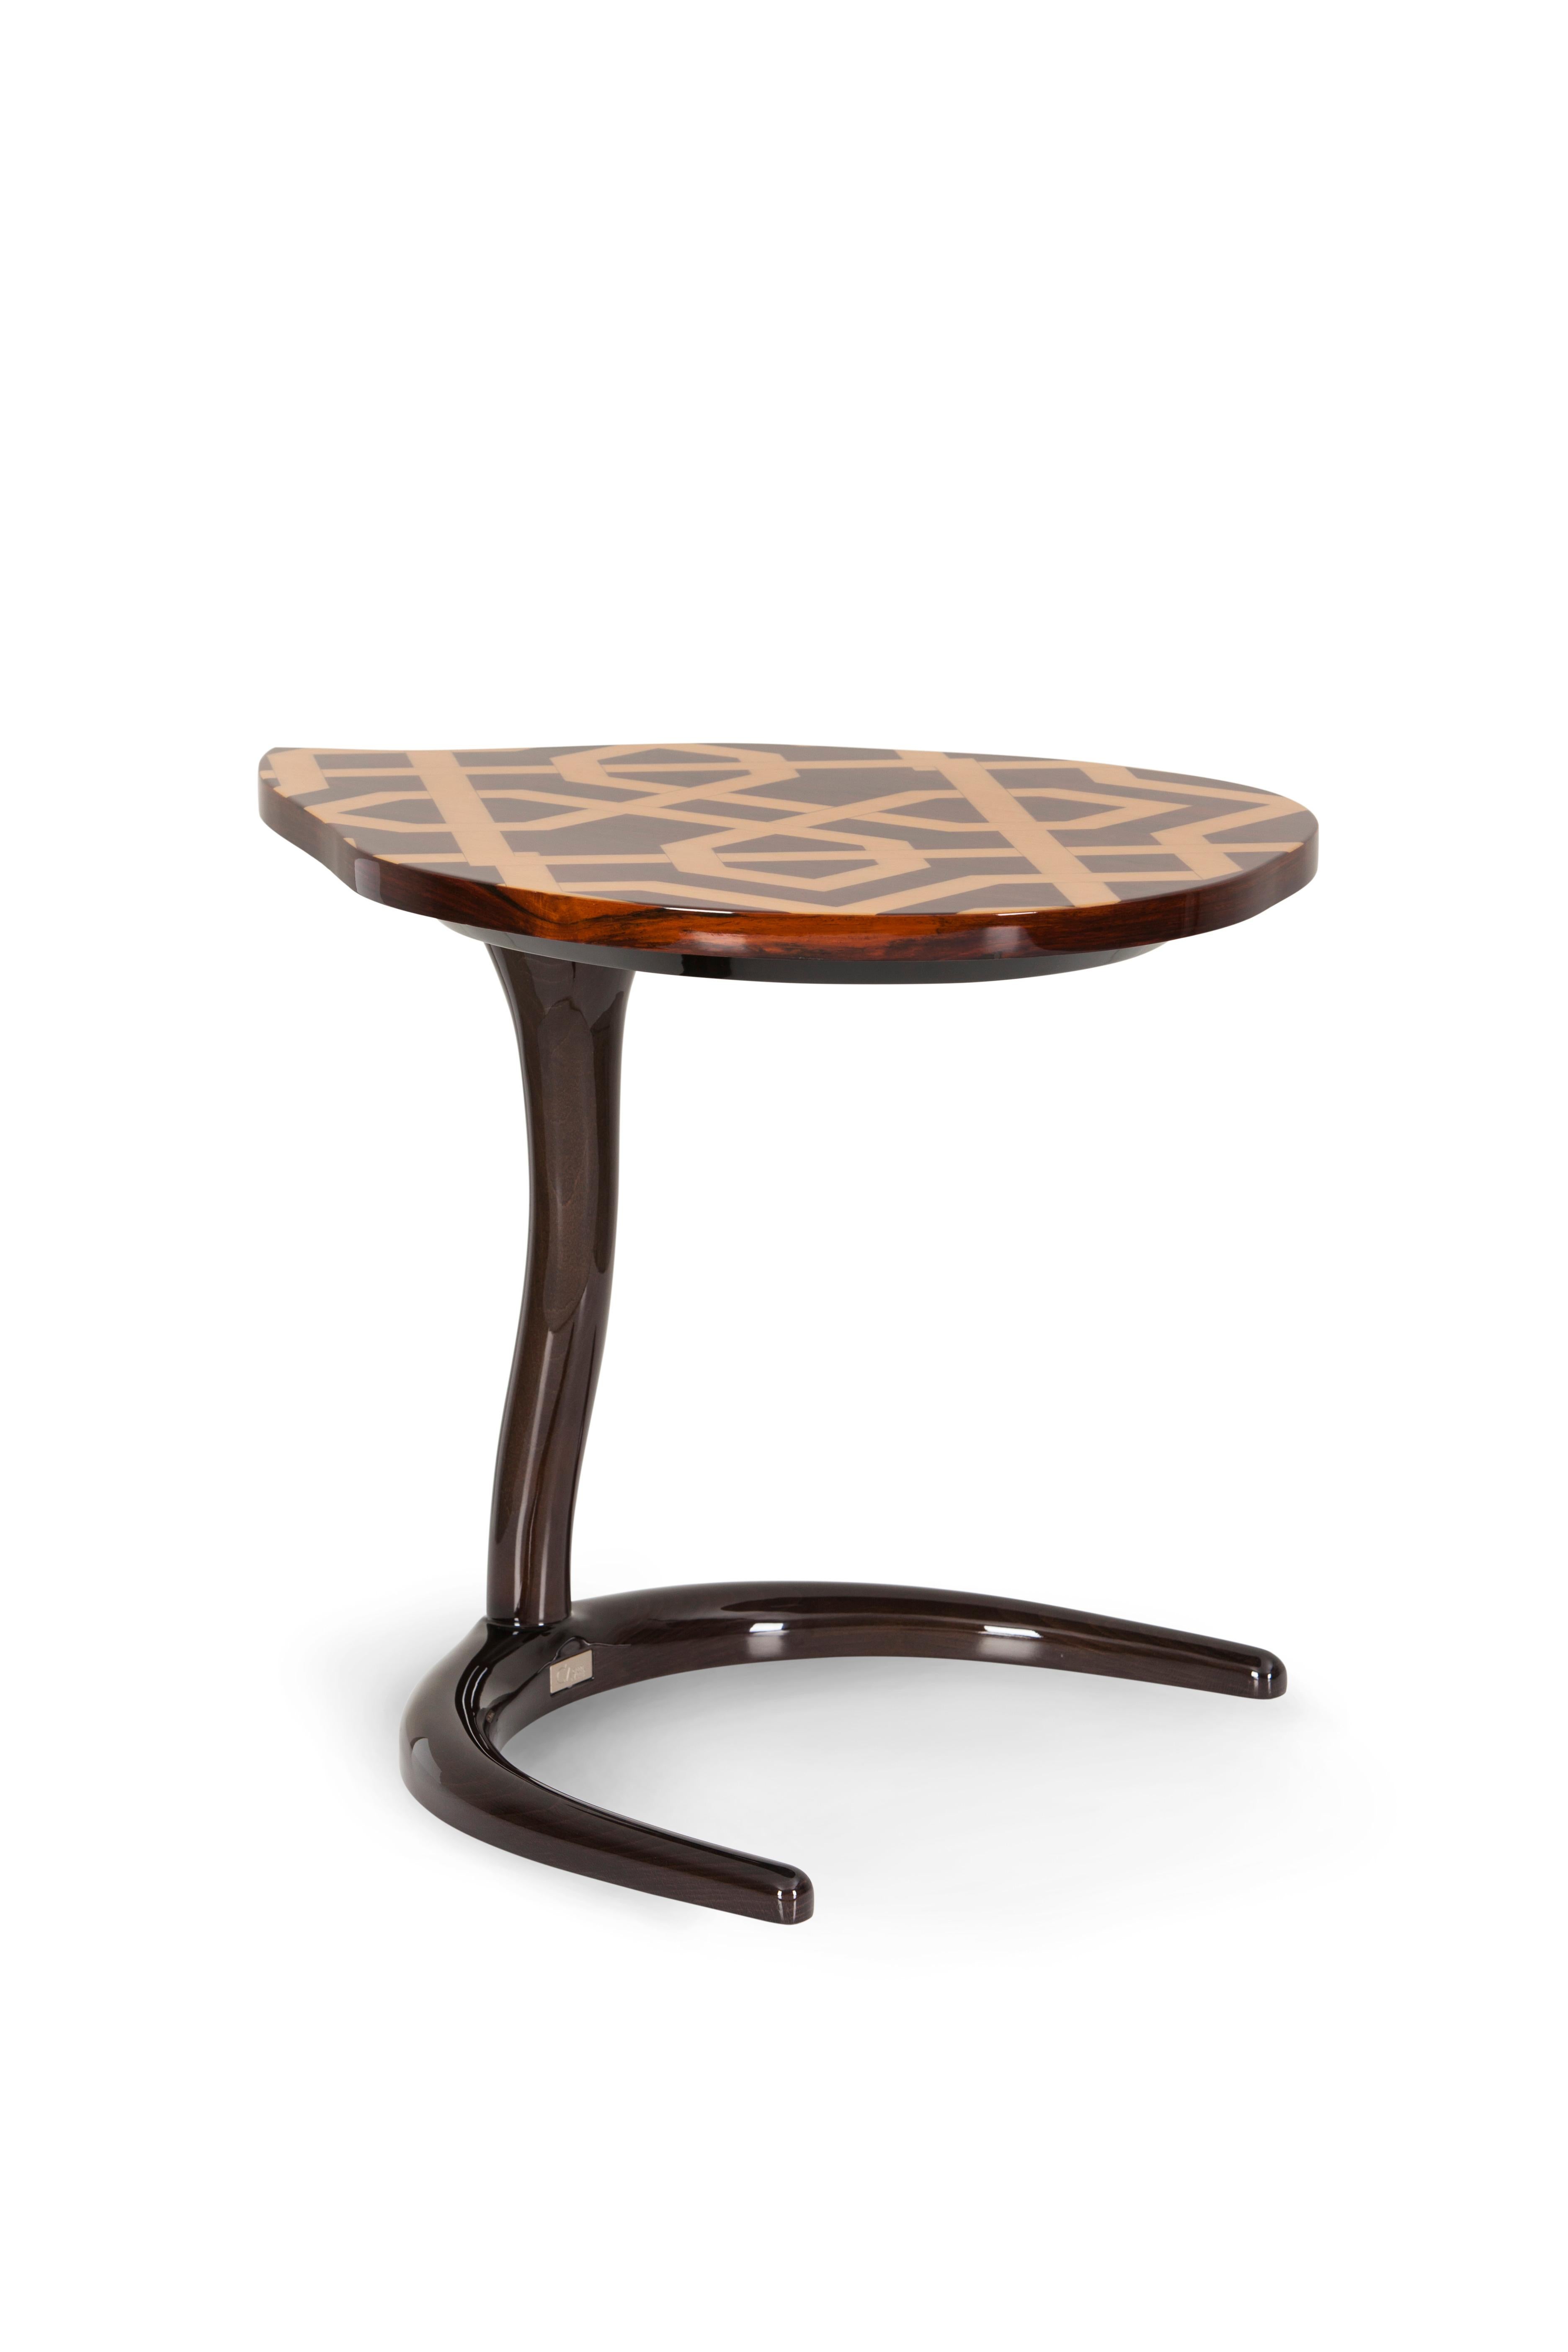 Hammered Art Deco Marquetry Infinity Side Table Beech Handmade in Portugal by Greenapple For Sale